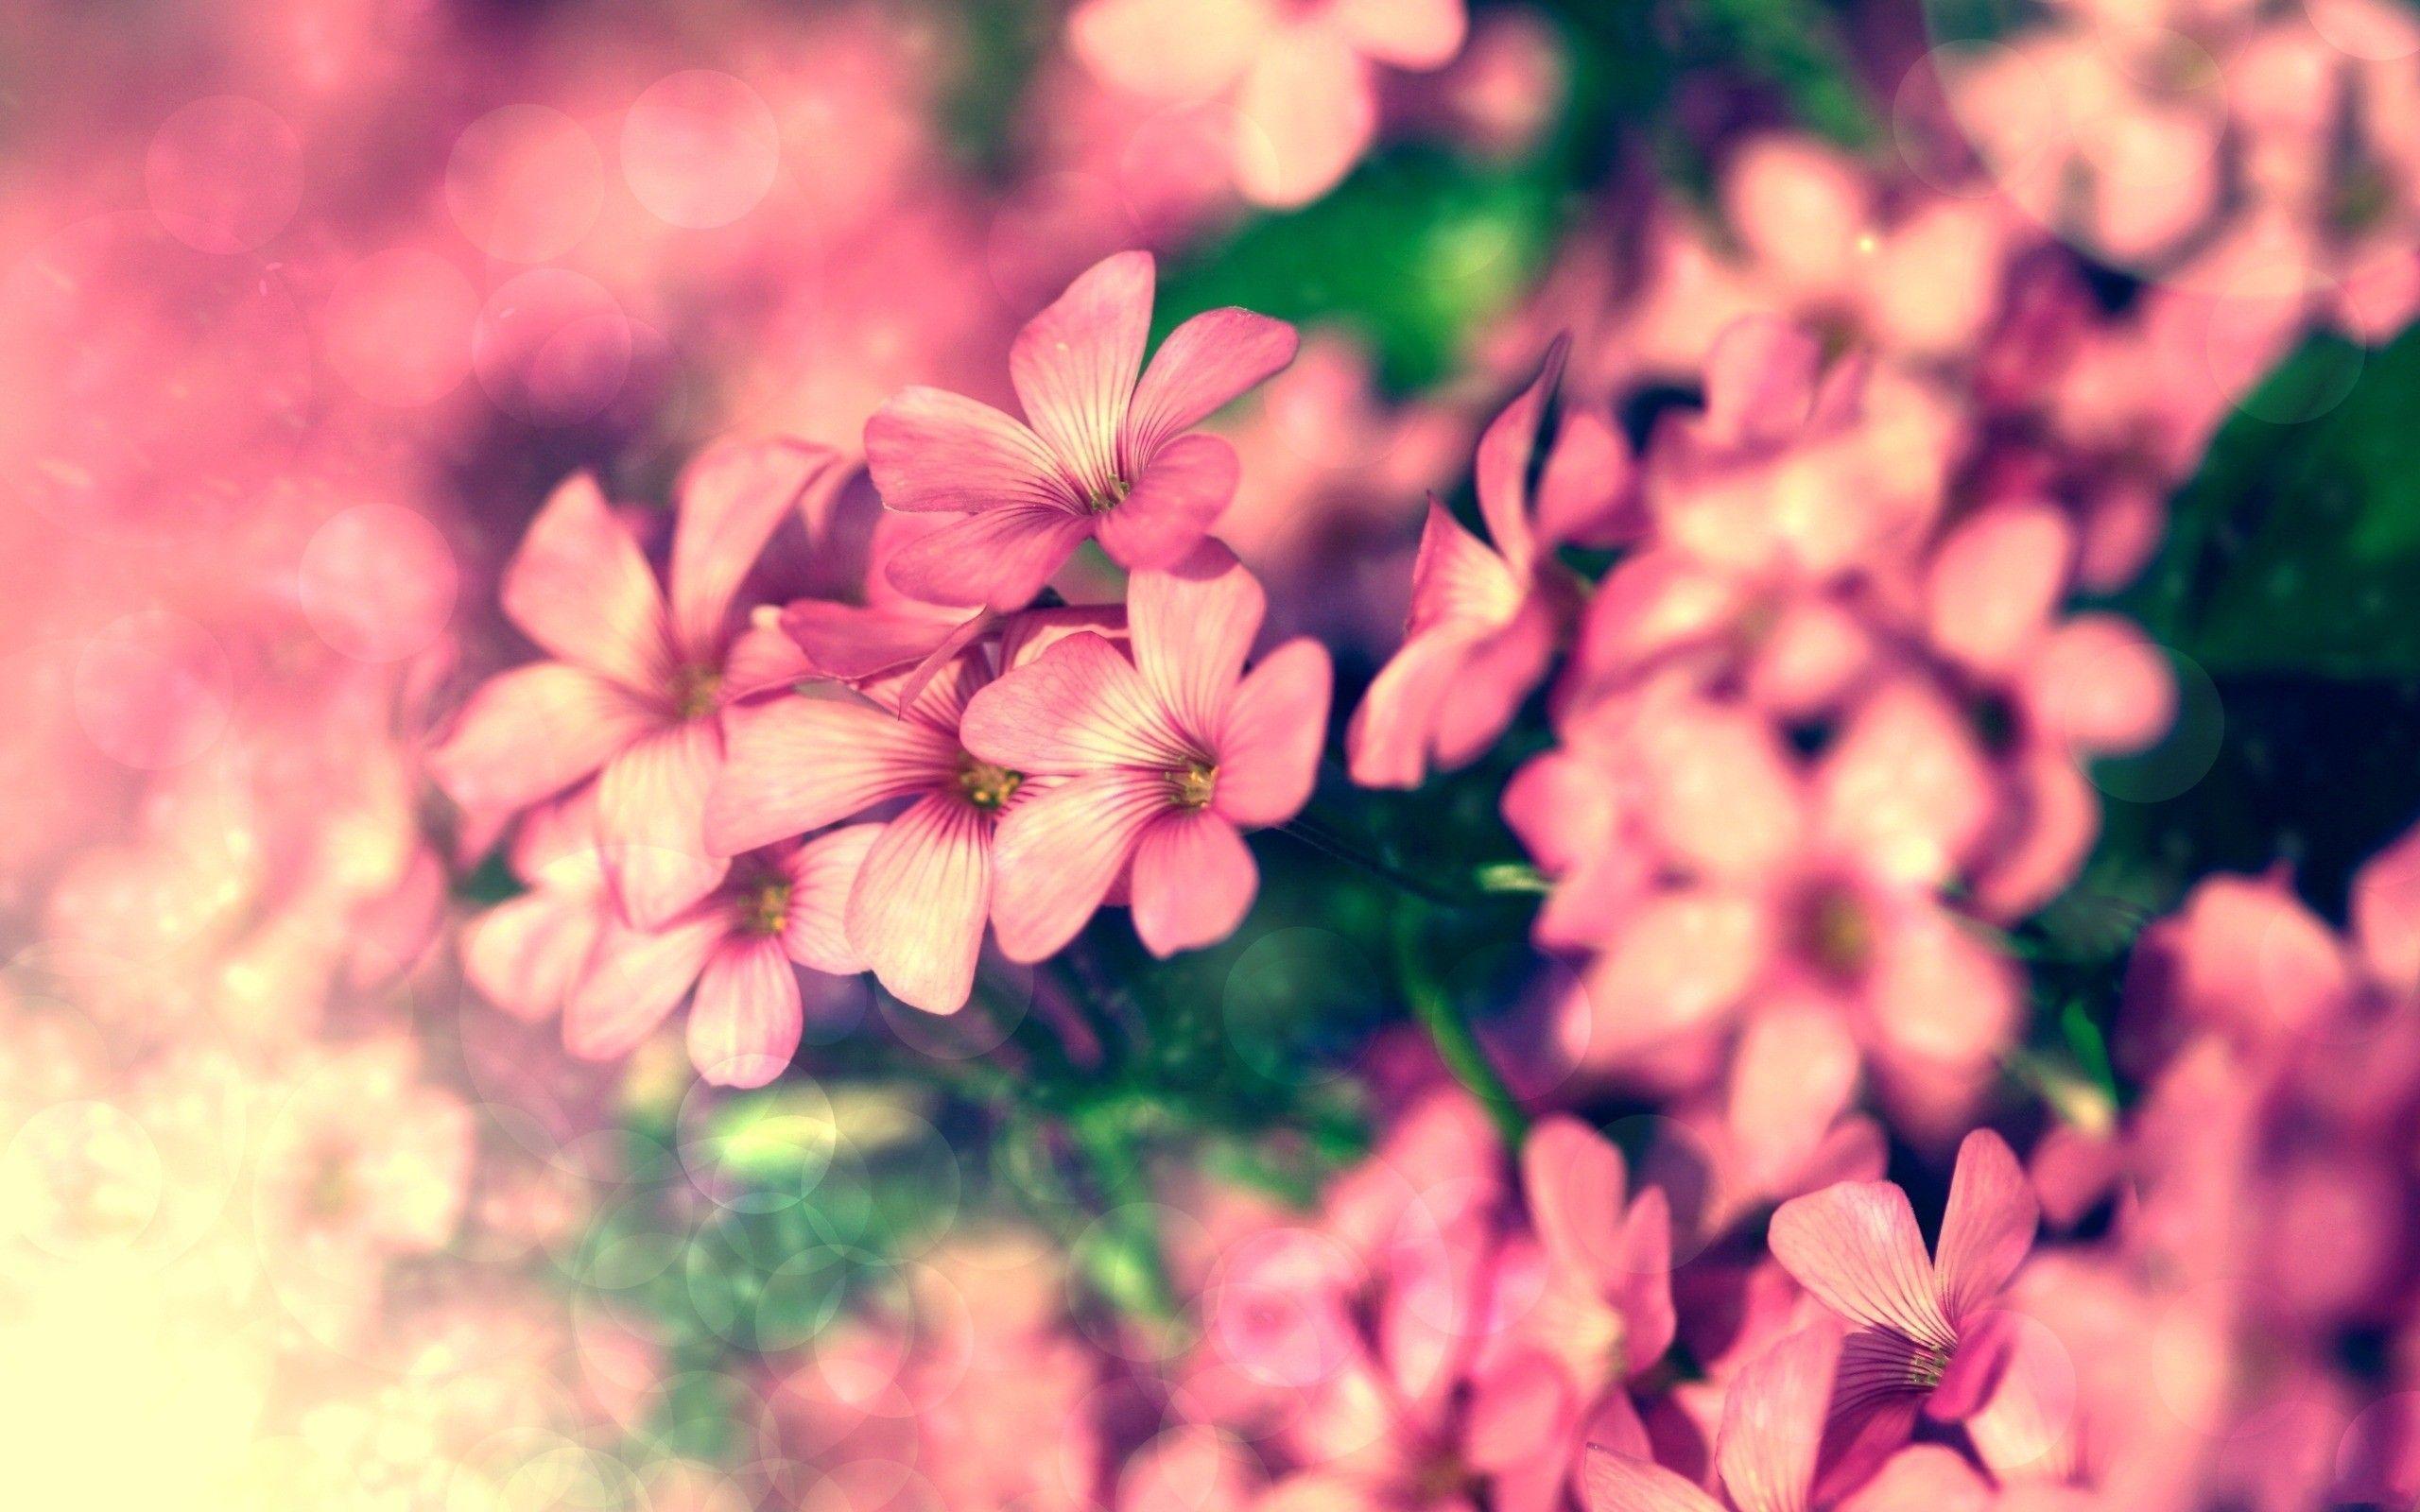 The Image of Nature Flowers Pink 2560x1600 HD Wallpaper